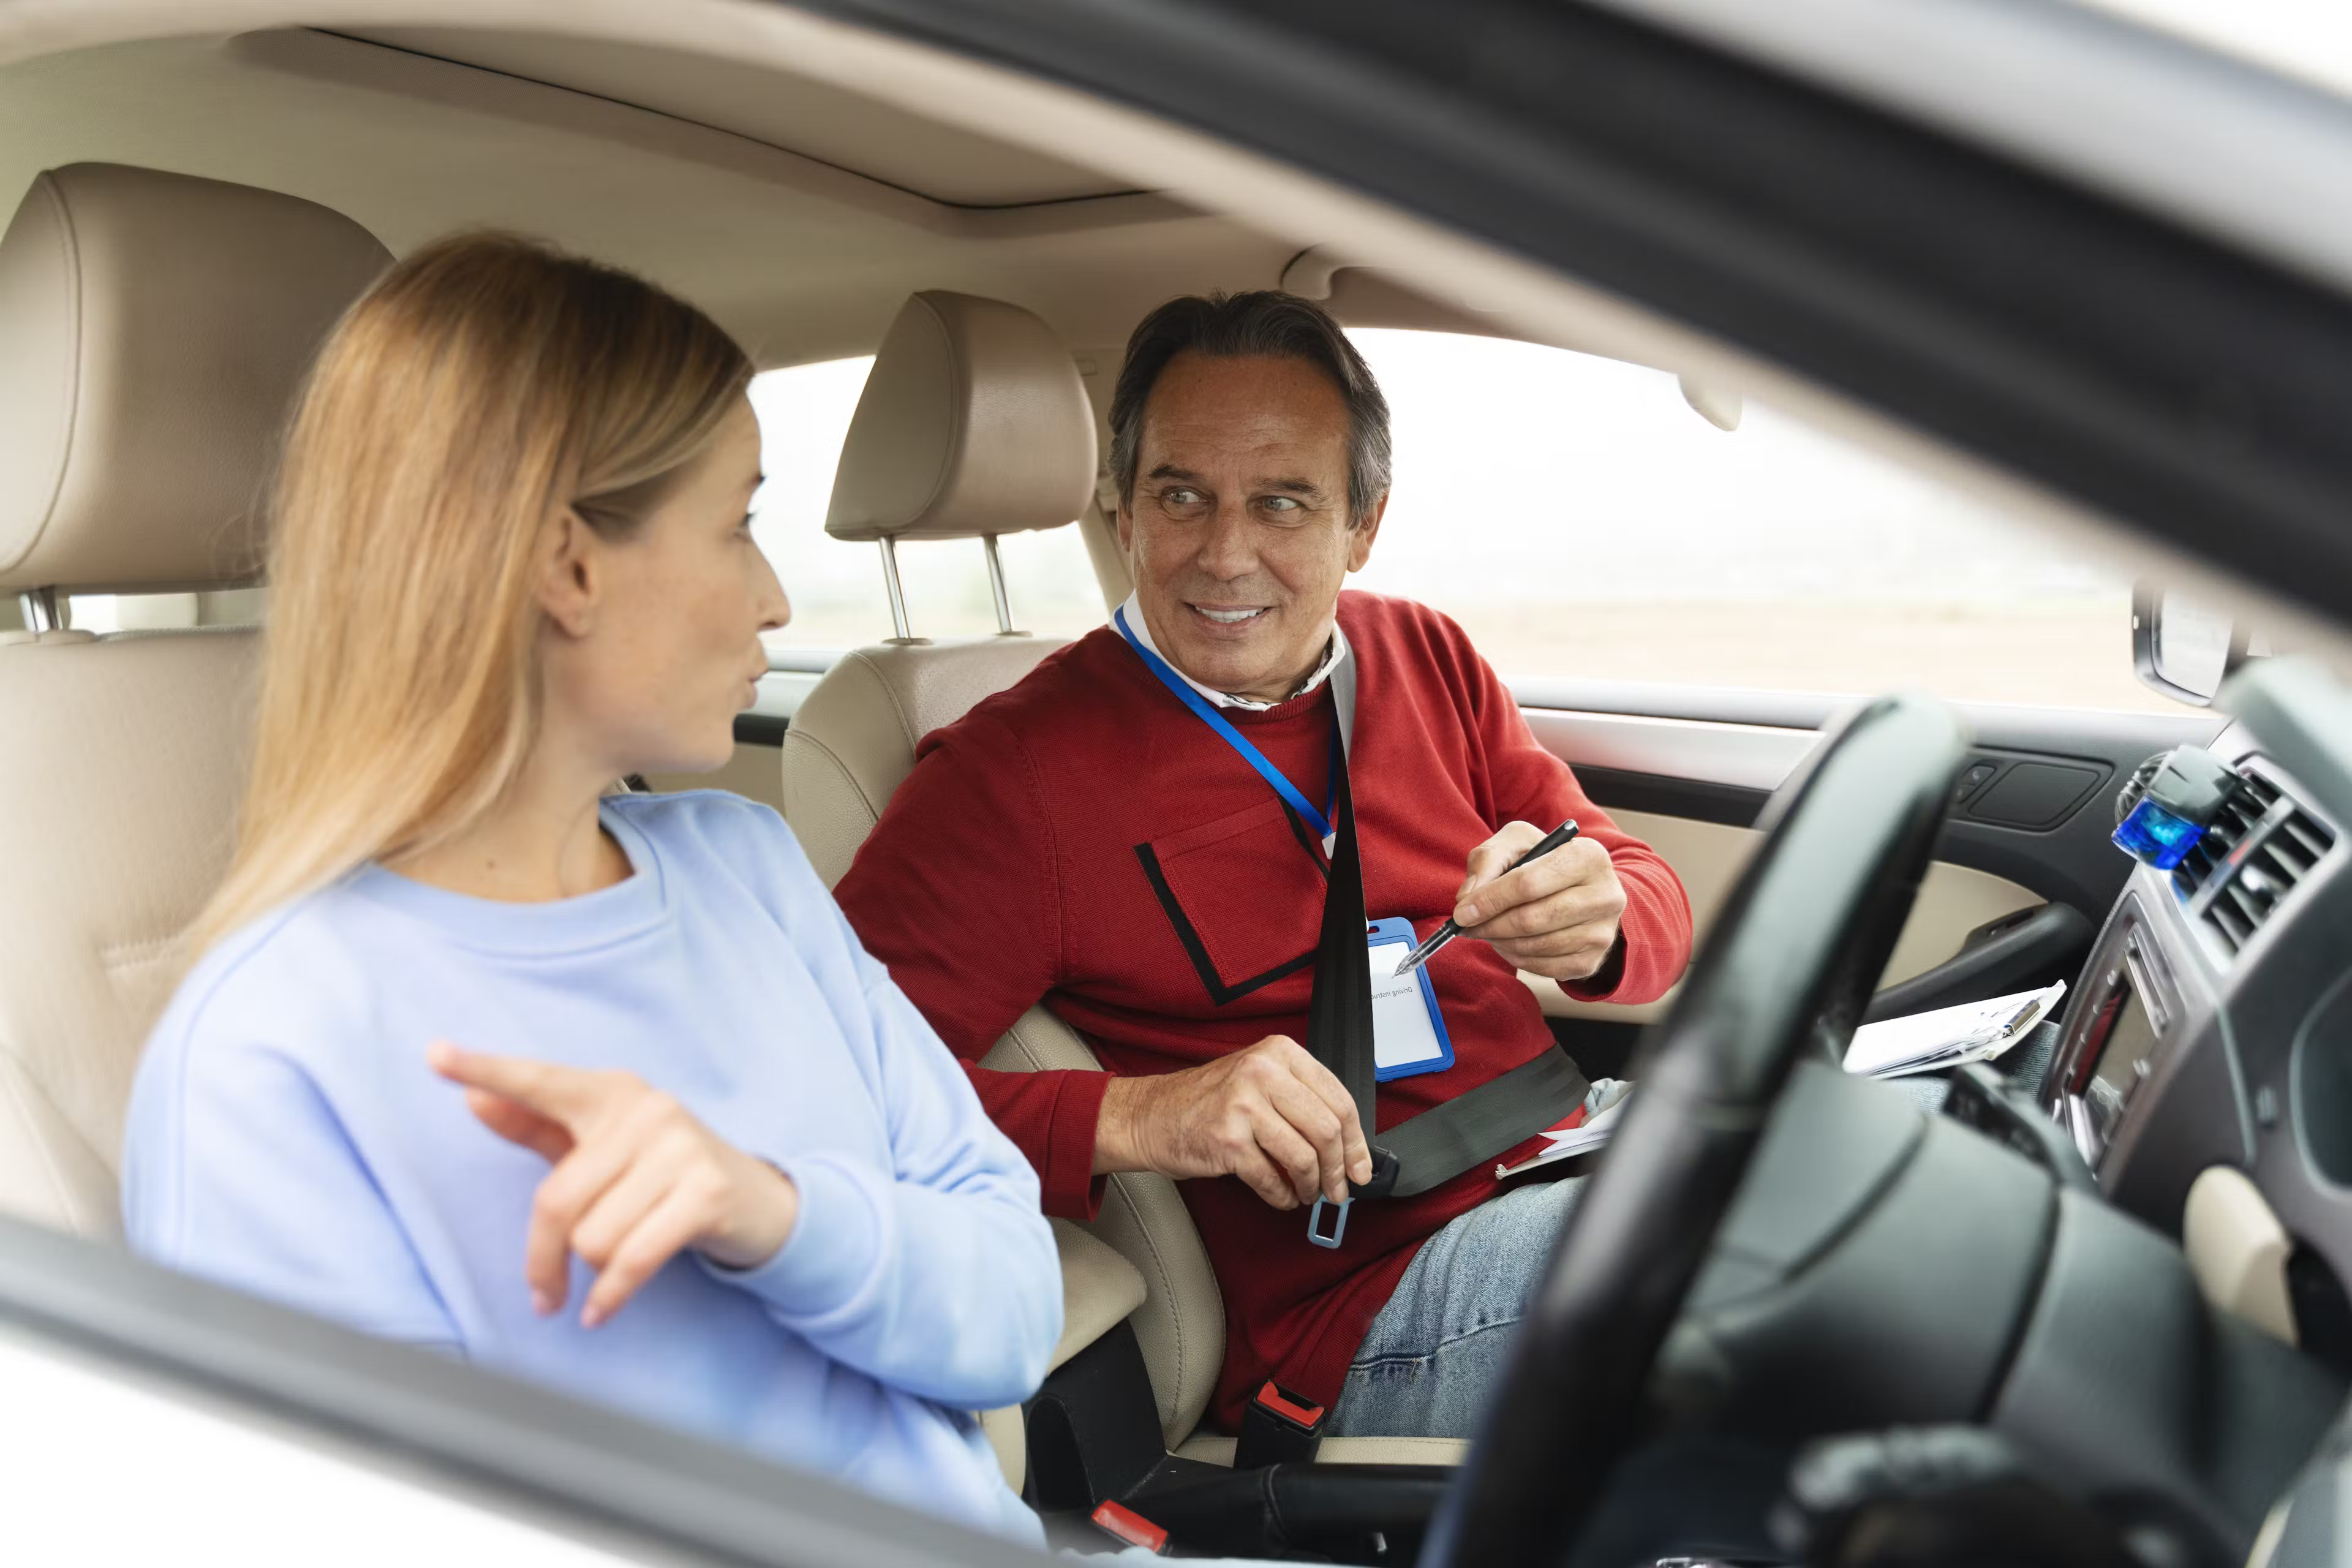 Driving instructor teaching an Intensive Driving Course